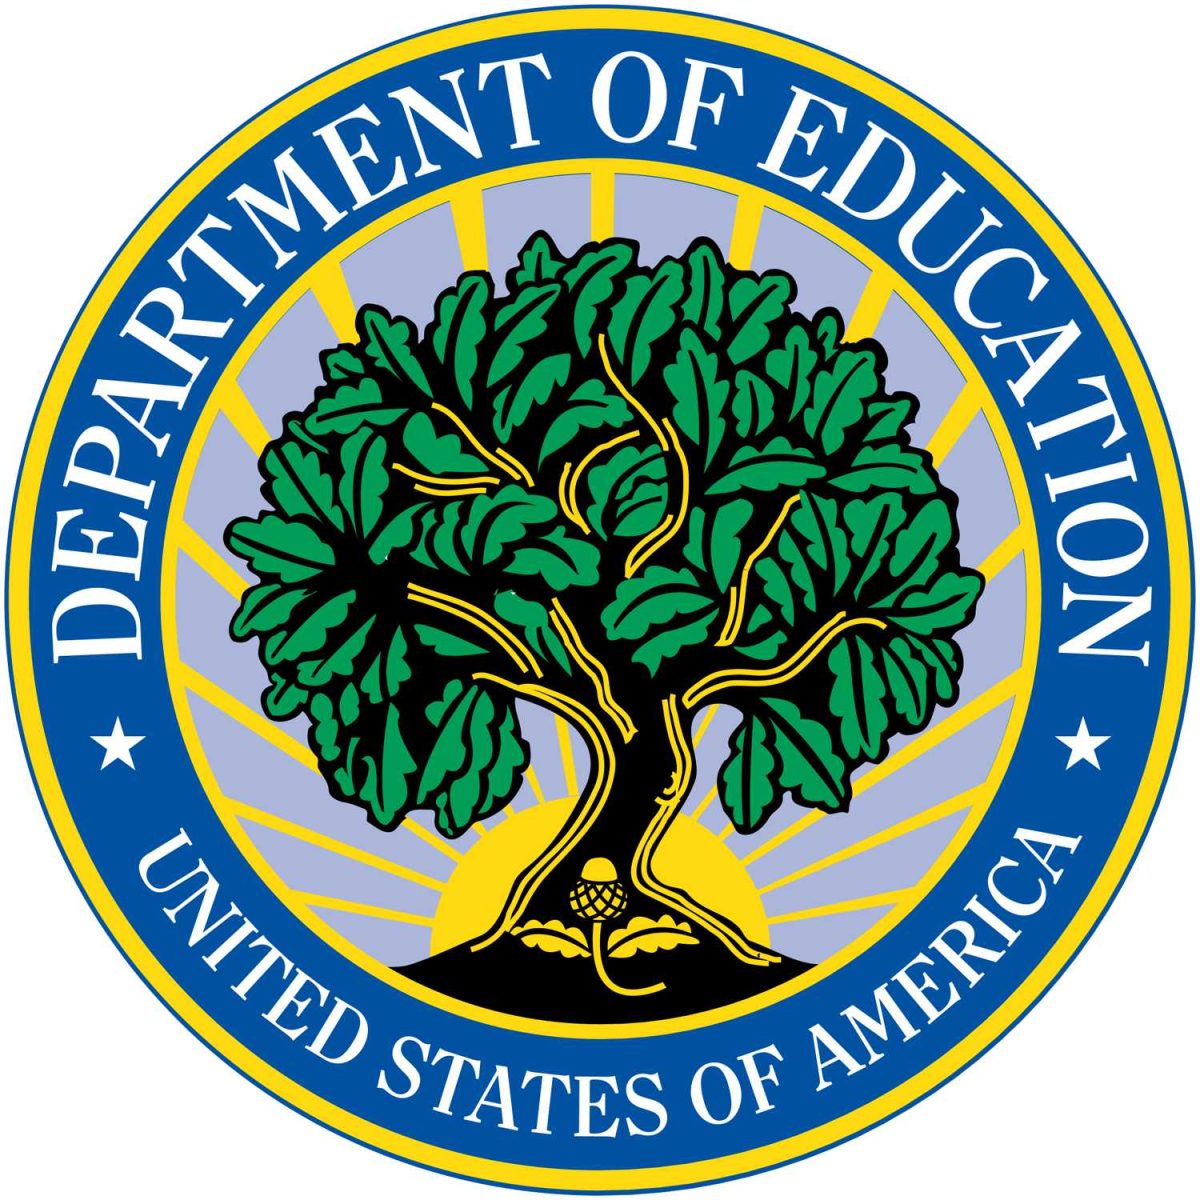 The Department of Education logo.